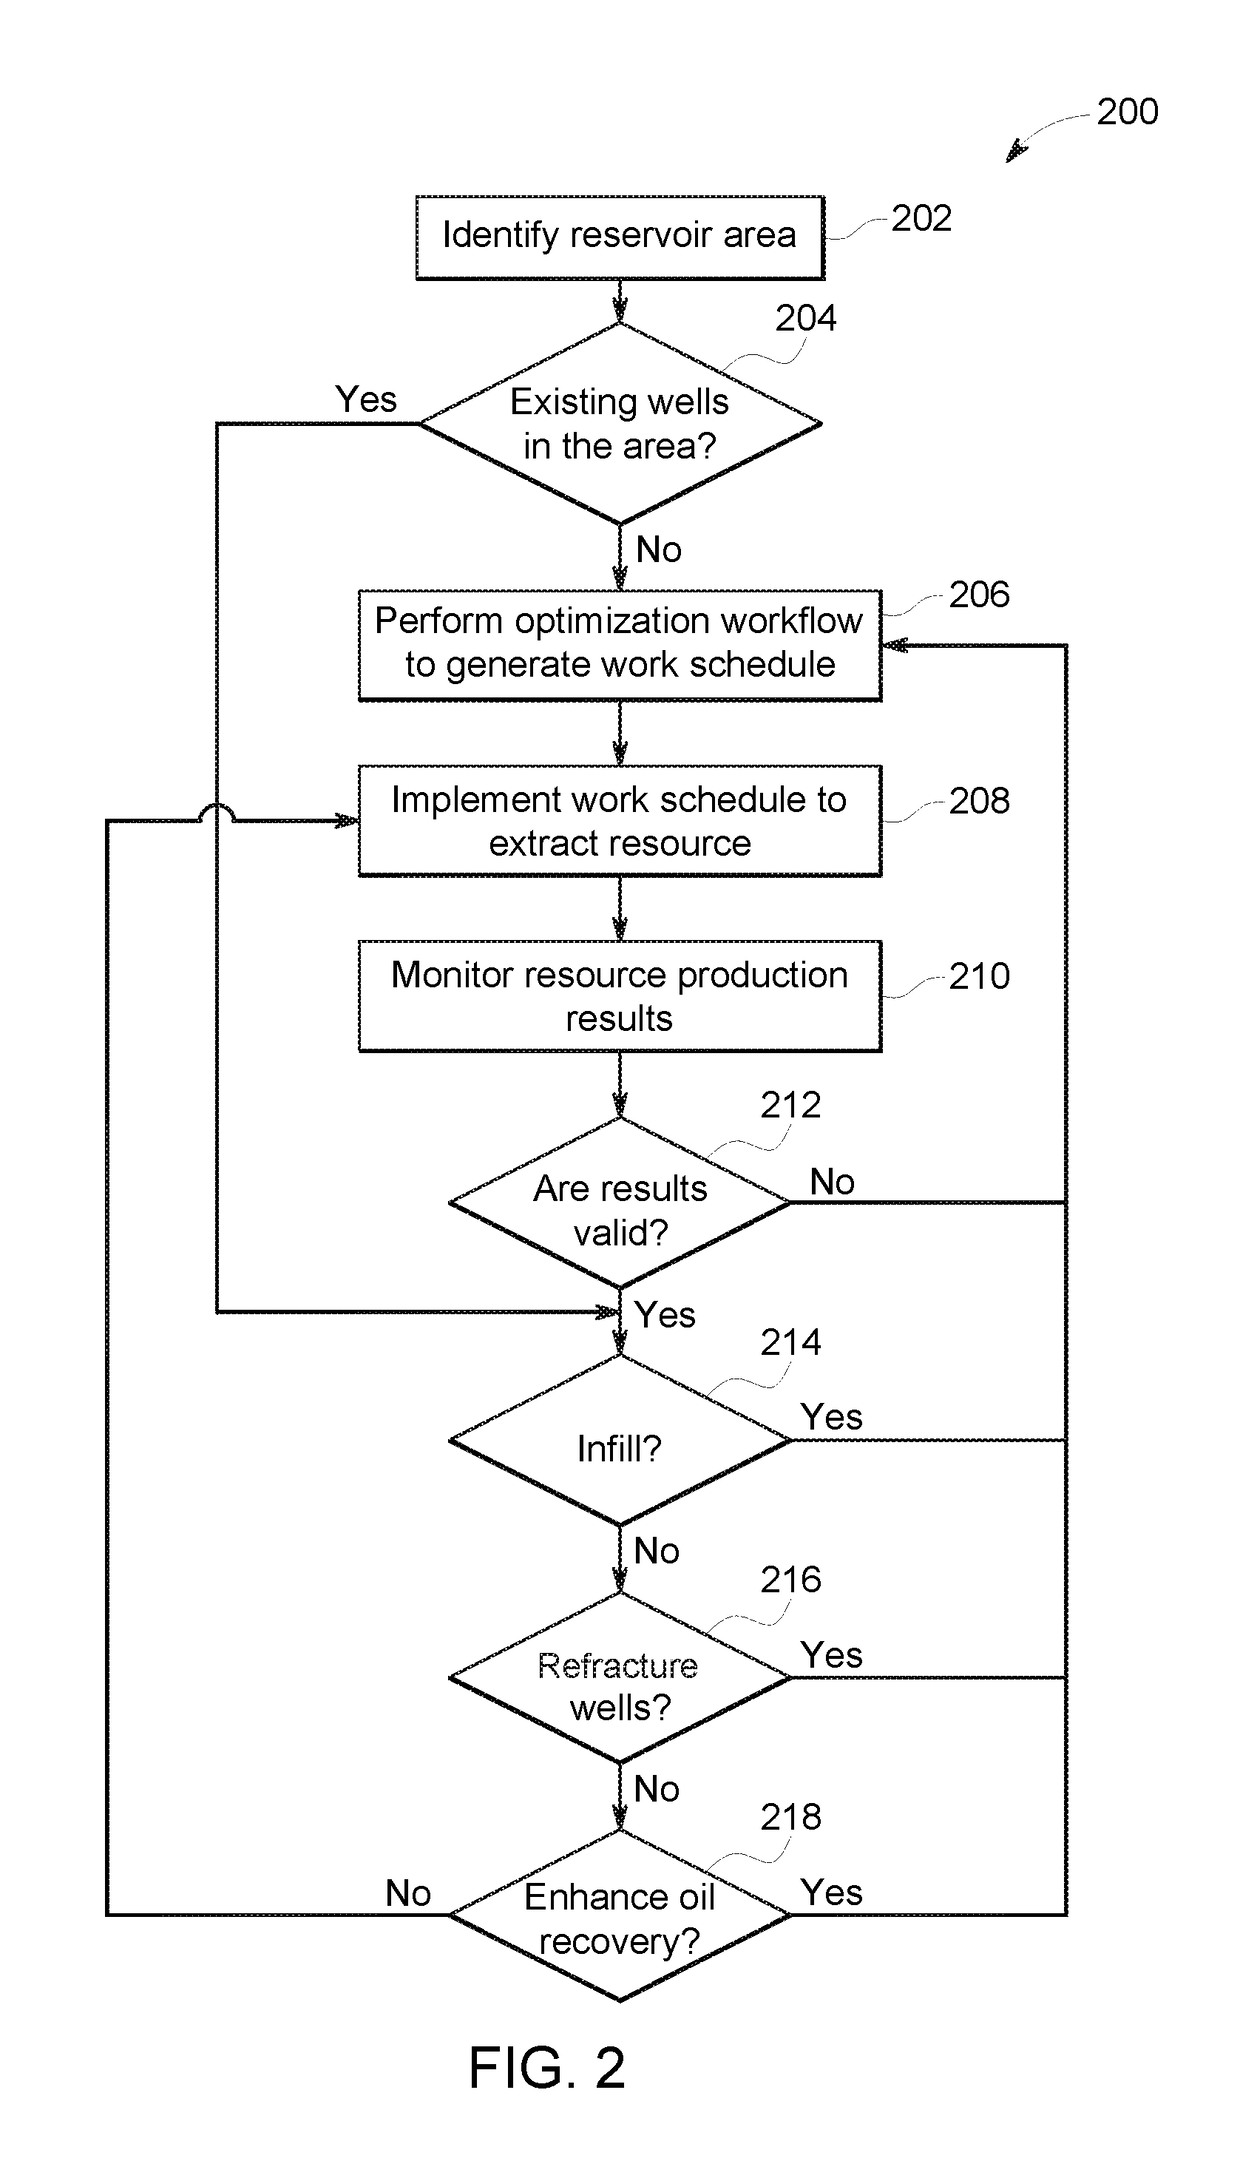 System and method for generating a schedule to extract a resource from a reservoir